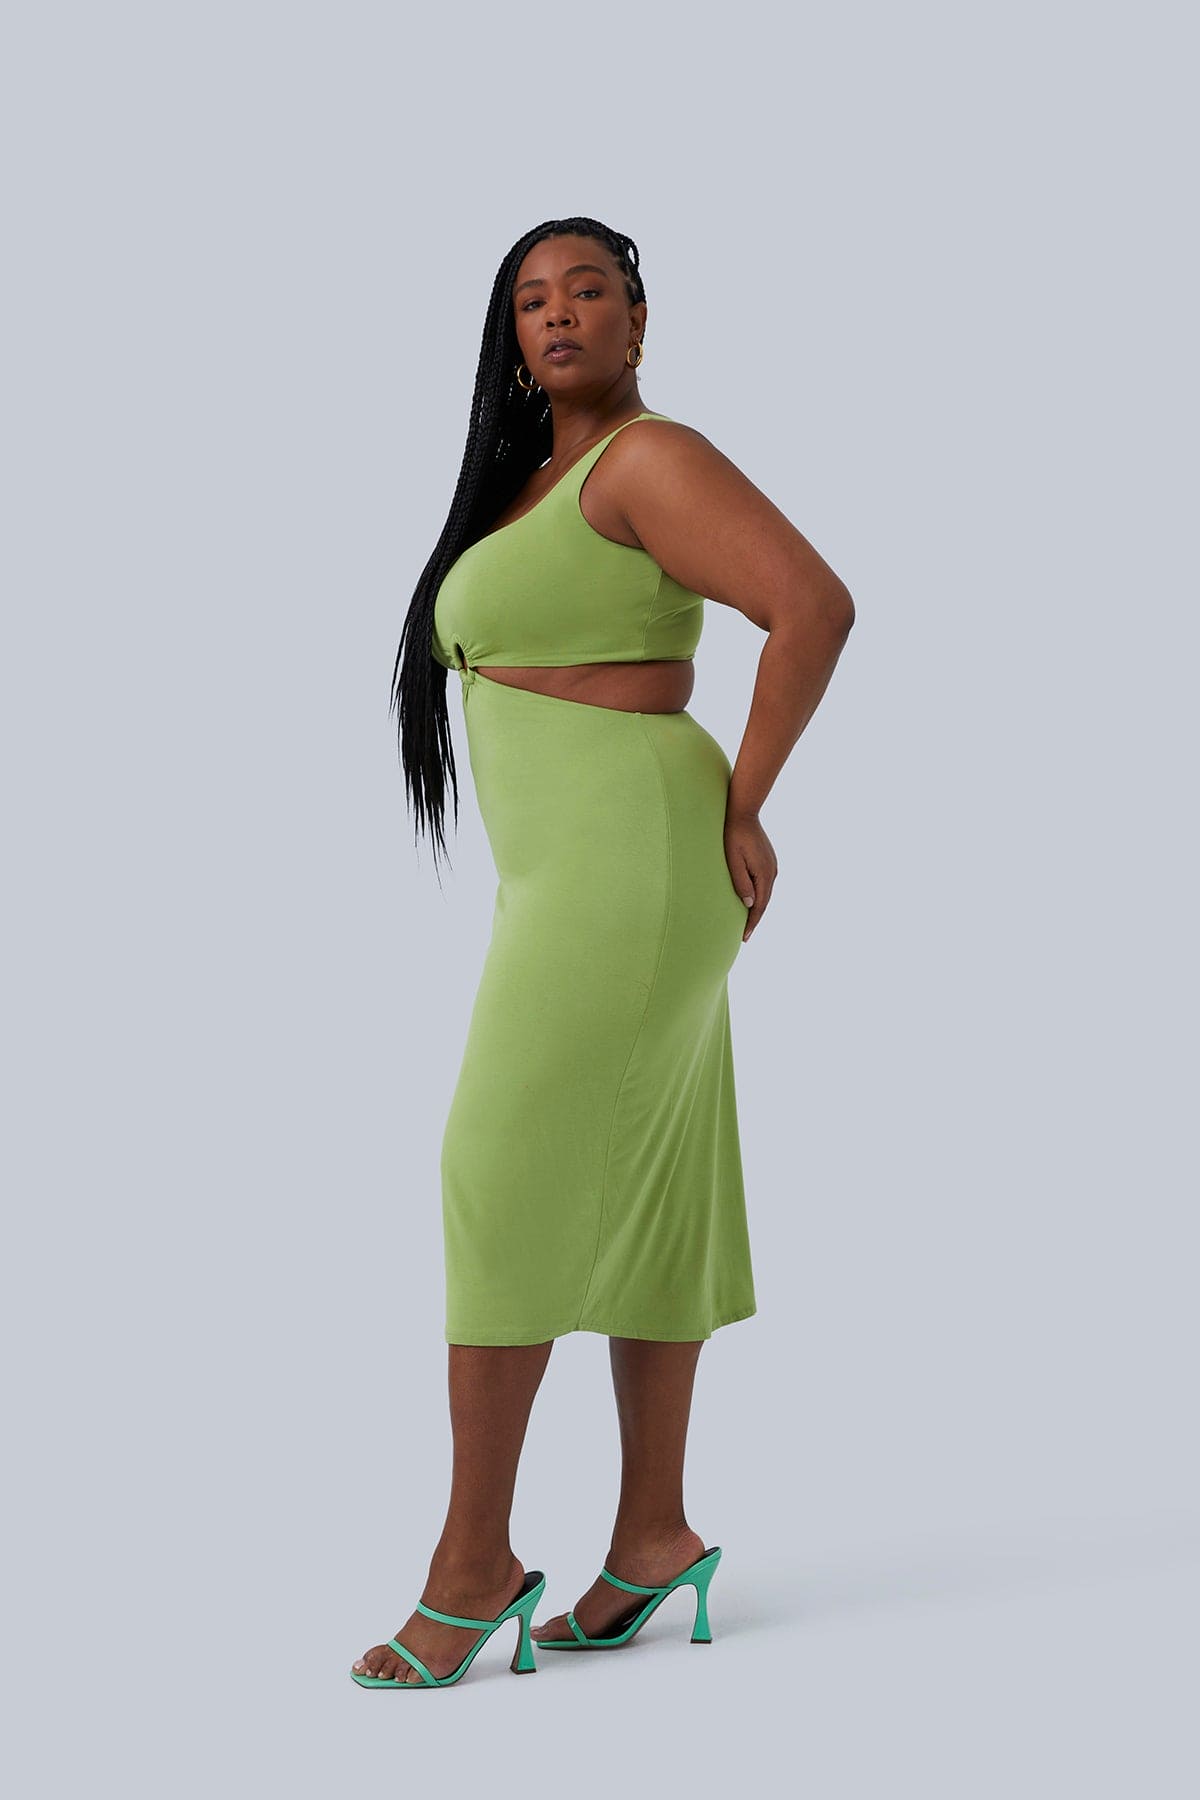 Side view of the Gigi Midi Plus Size Dress size 1X in Pistachio by Gia IRL. Model has hands on her low back and long black braids over shoulder. Dress goes to mid calf.